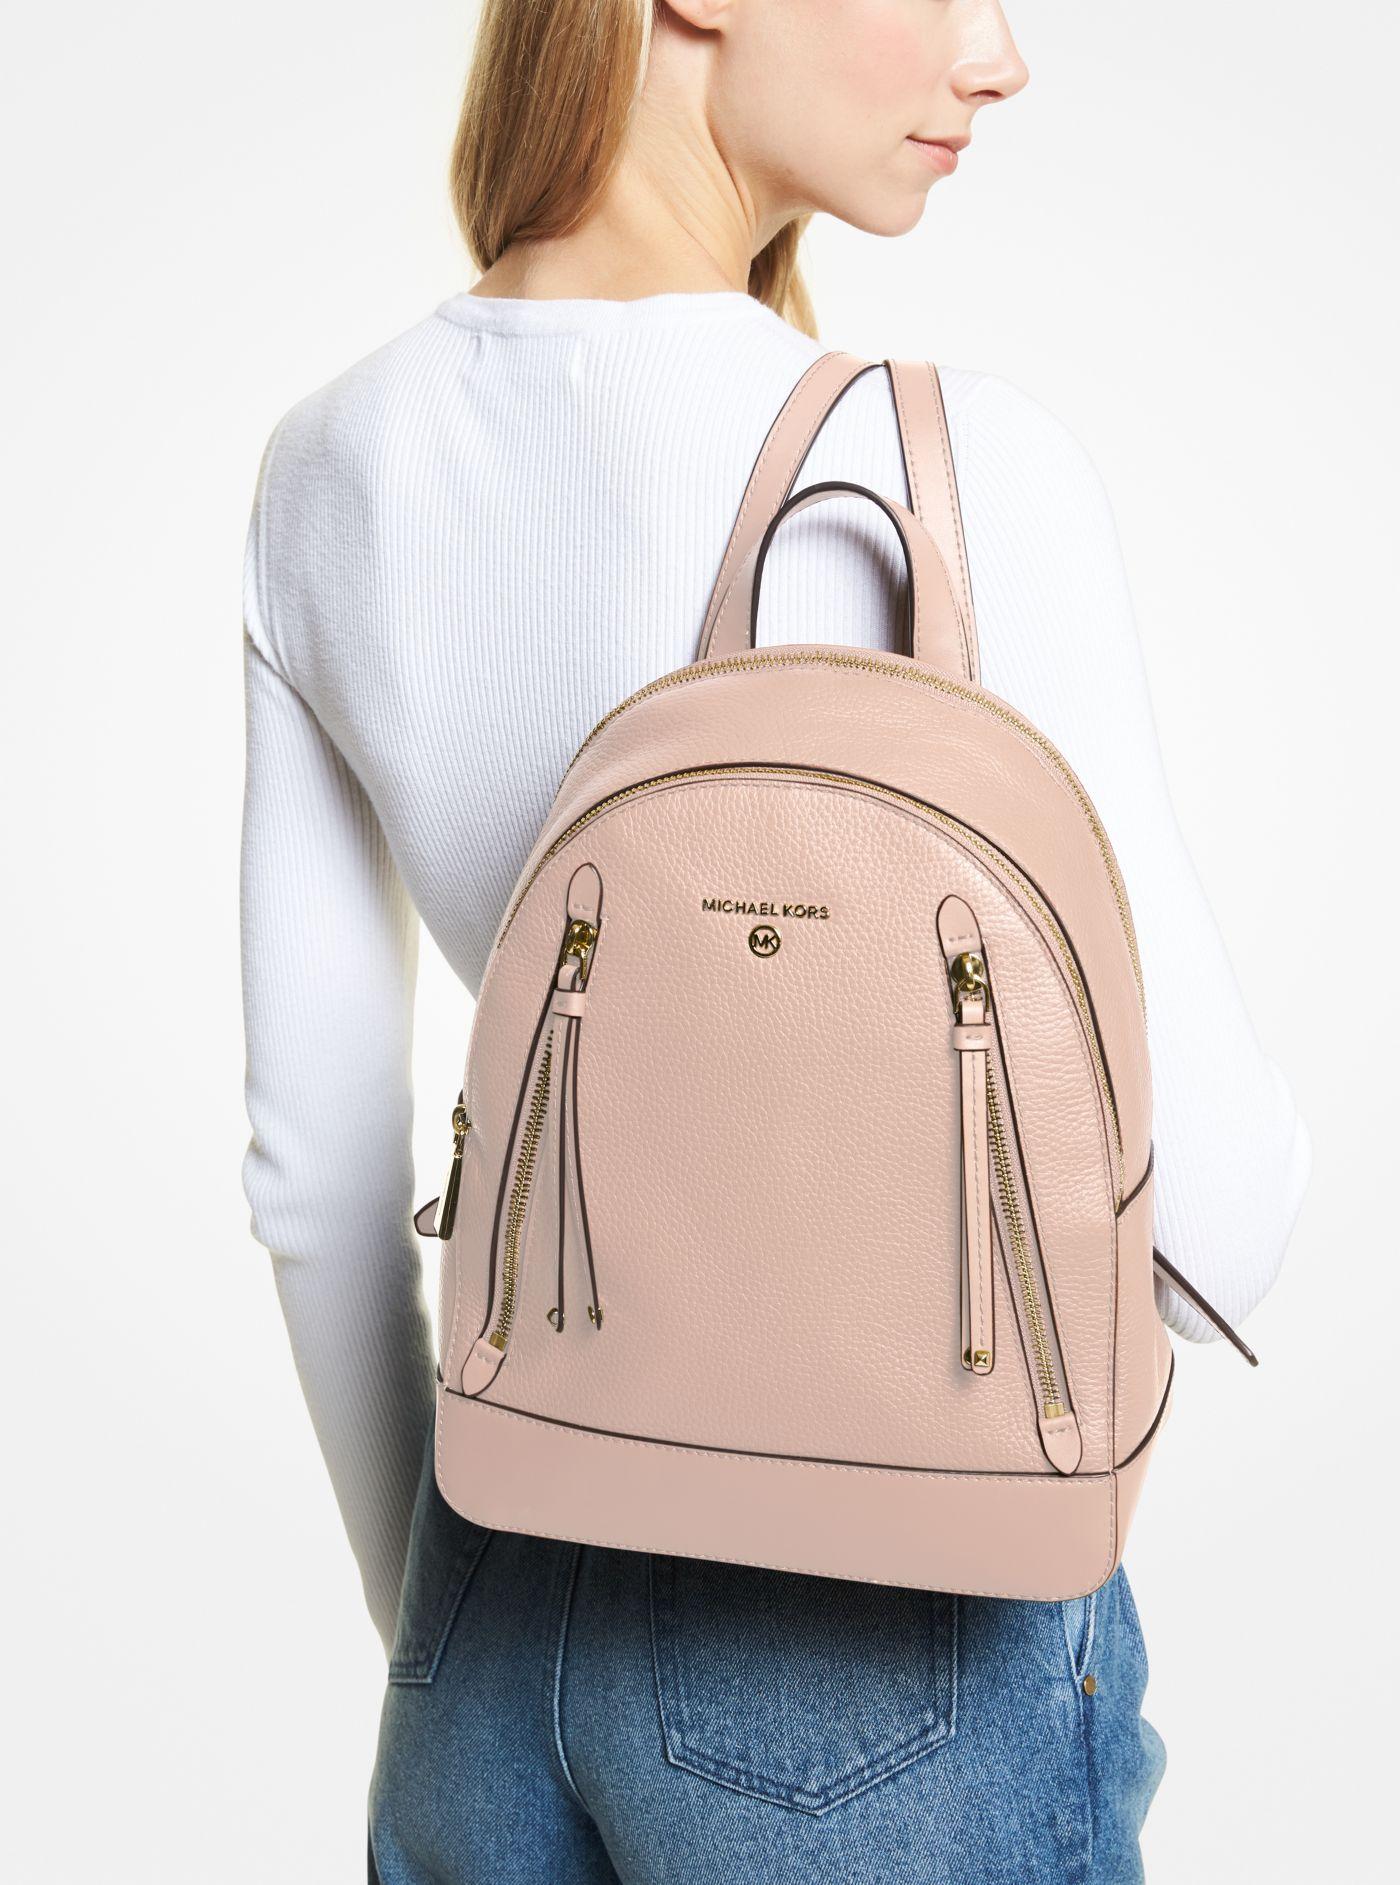 Michael Kors Brooklyn Medium Pebbled Leather Backpack in Soft Pink (Pink) -  Lyst